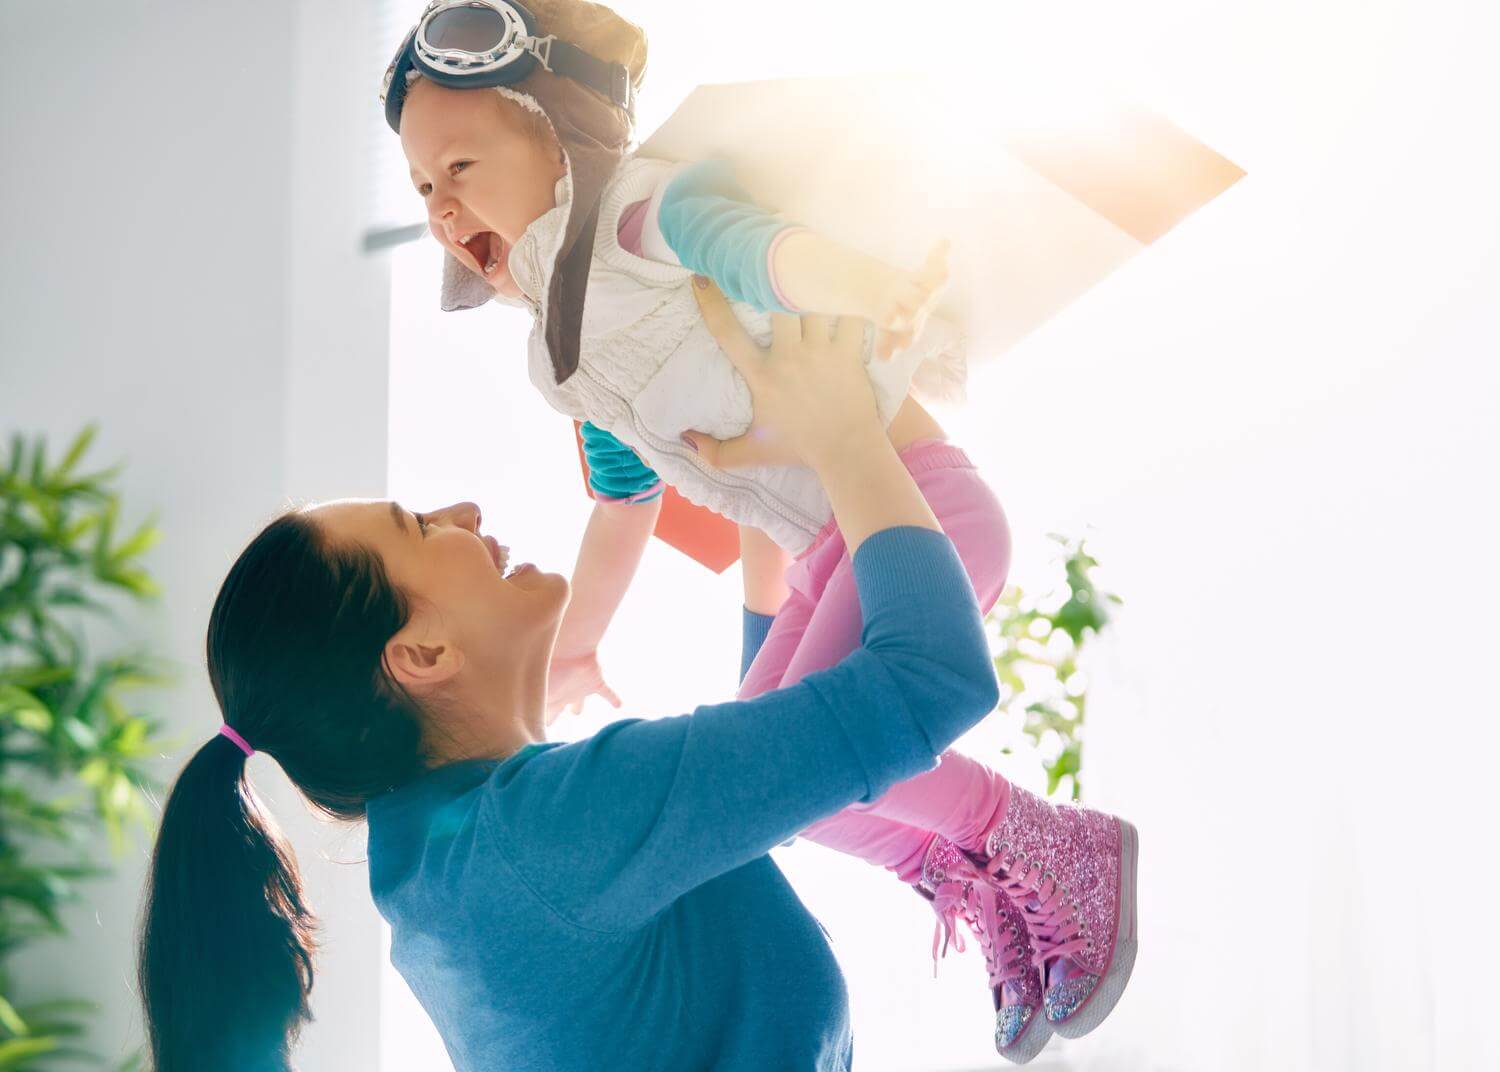 Woman holding young child up in the air, both laughing